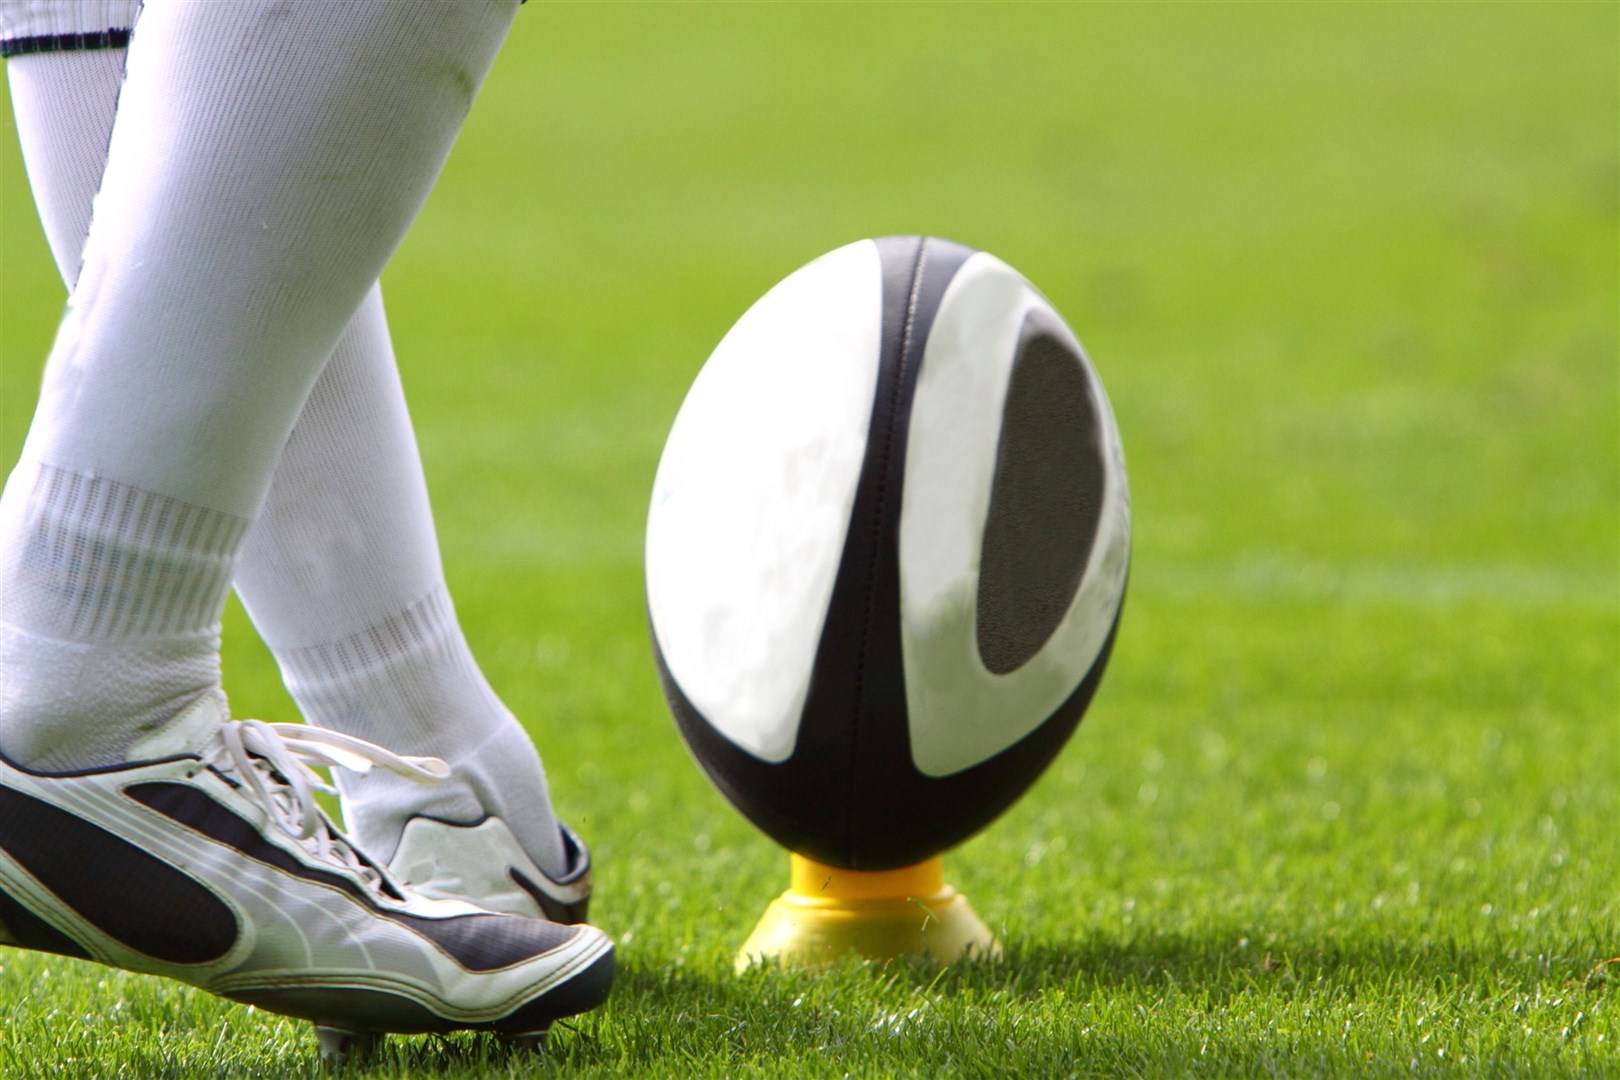 Rugby clubs across the north-east have been supported by the funding.